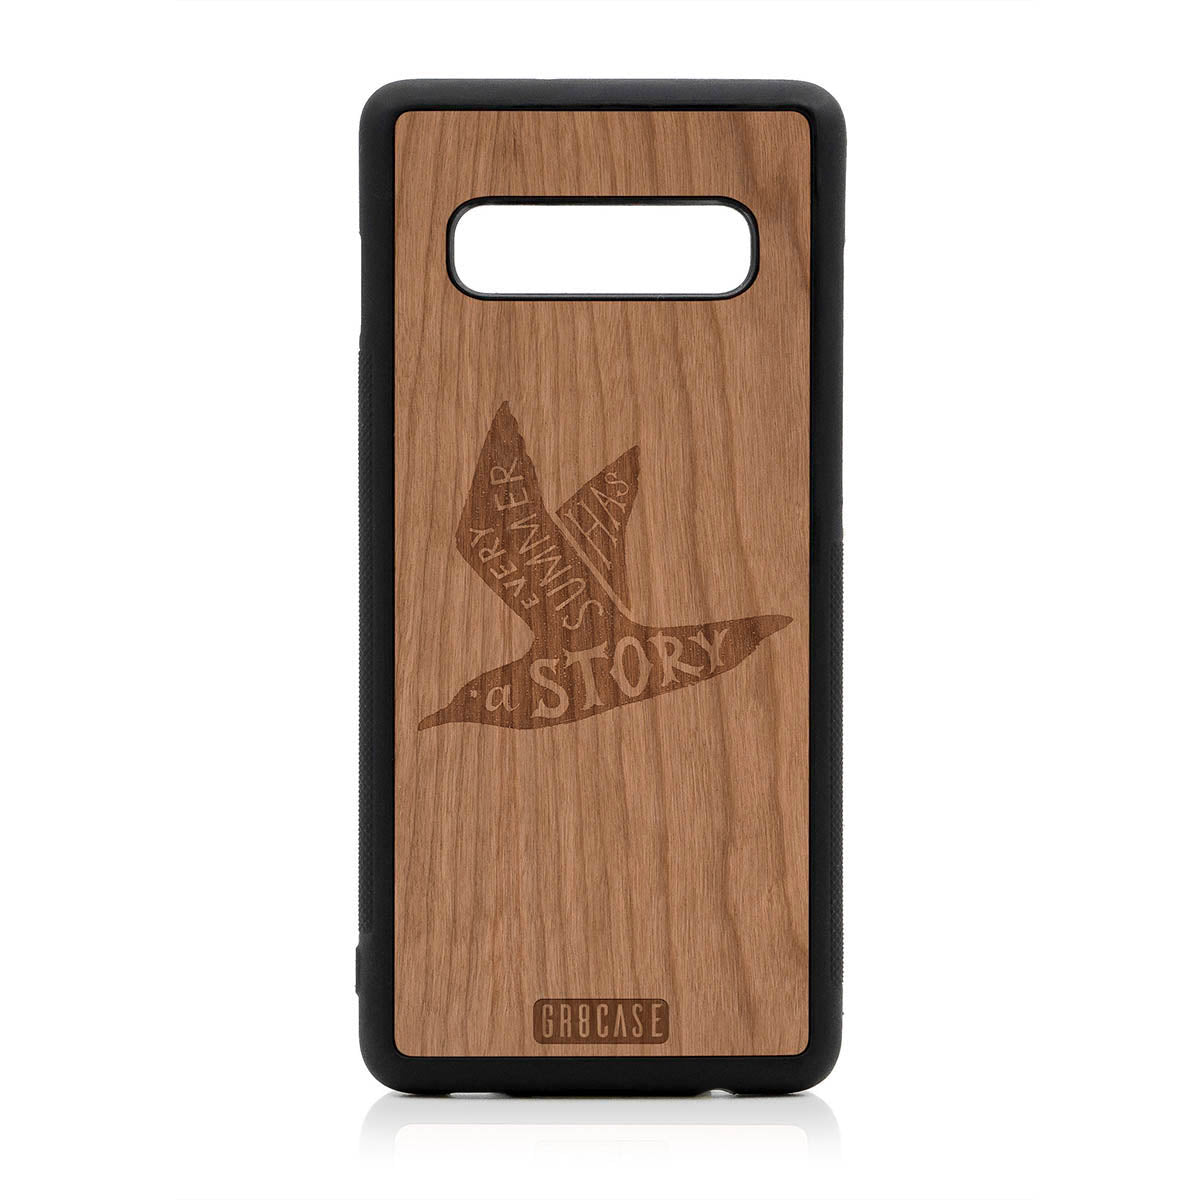 Every Summer Has A Story (Seagull) Design Wood Case For Samsung Galaxy S10 Plus